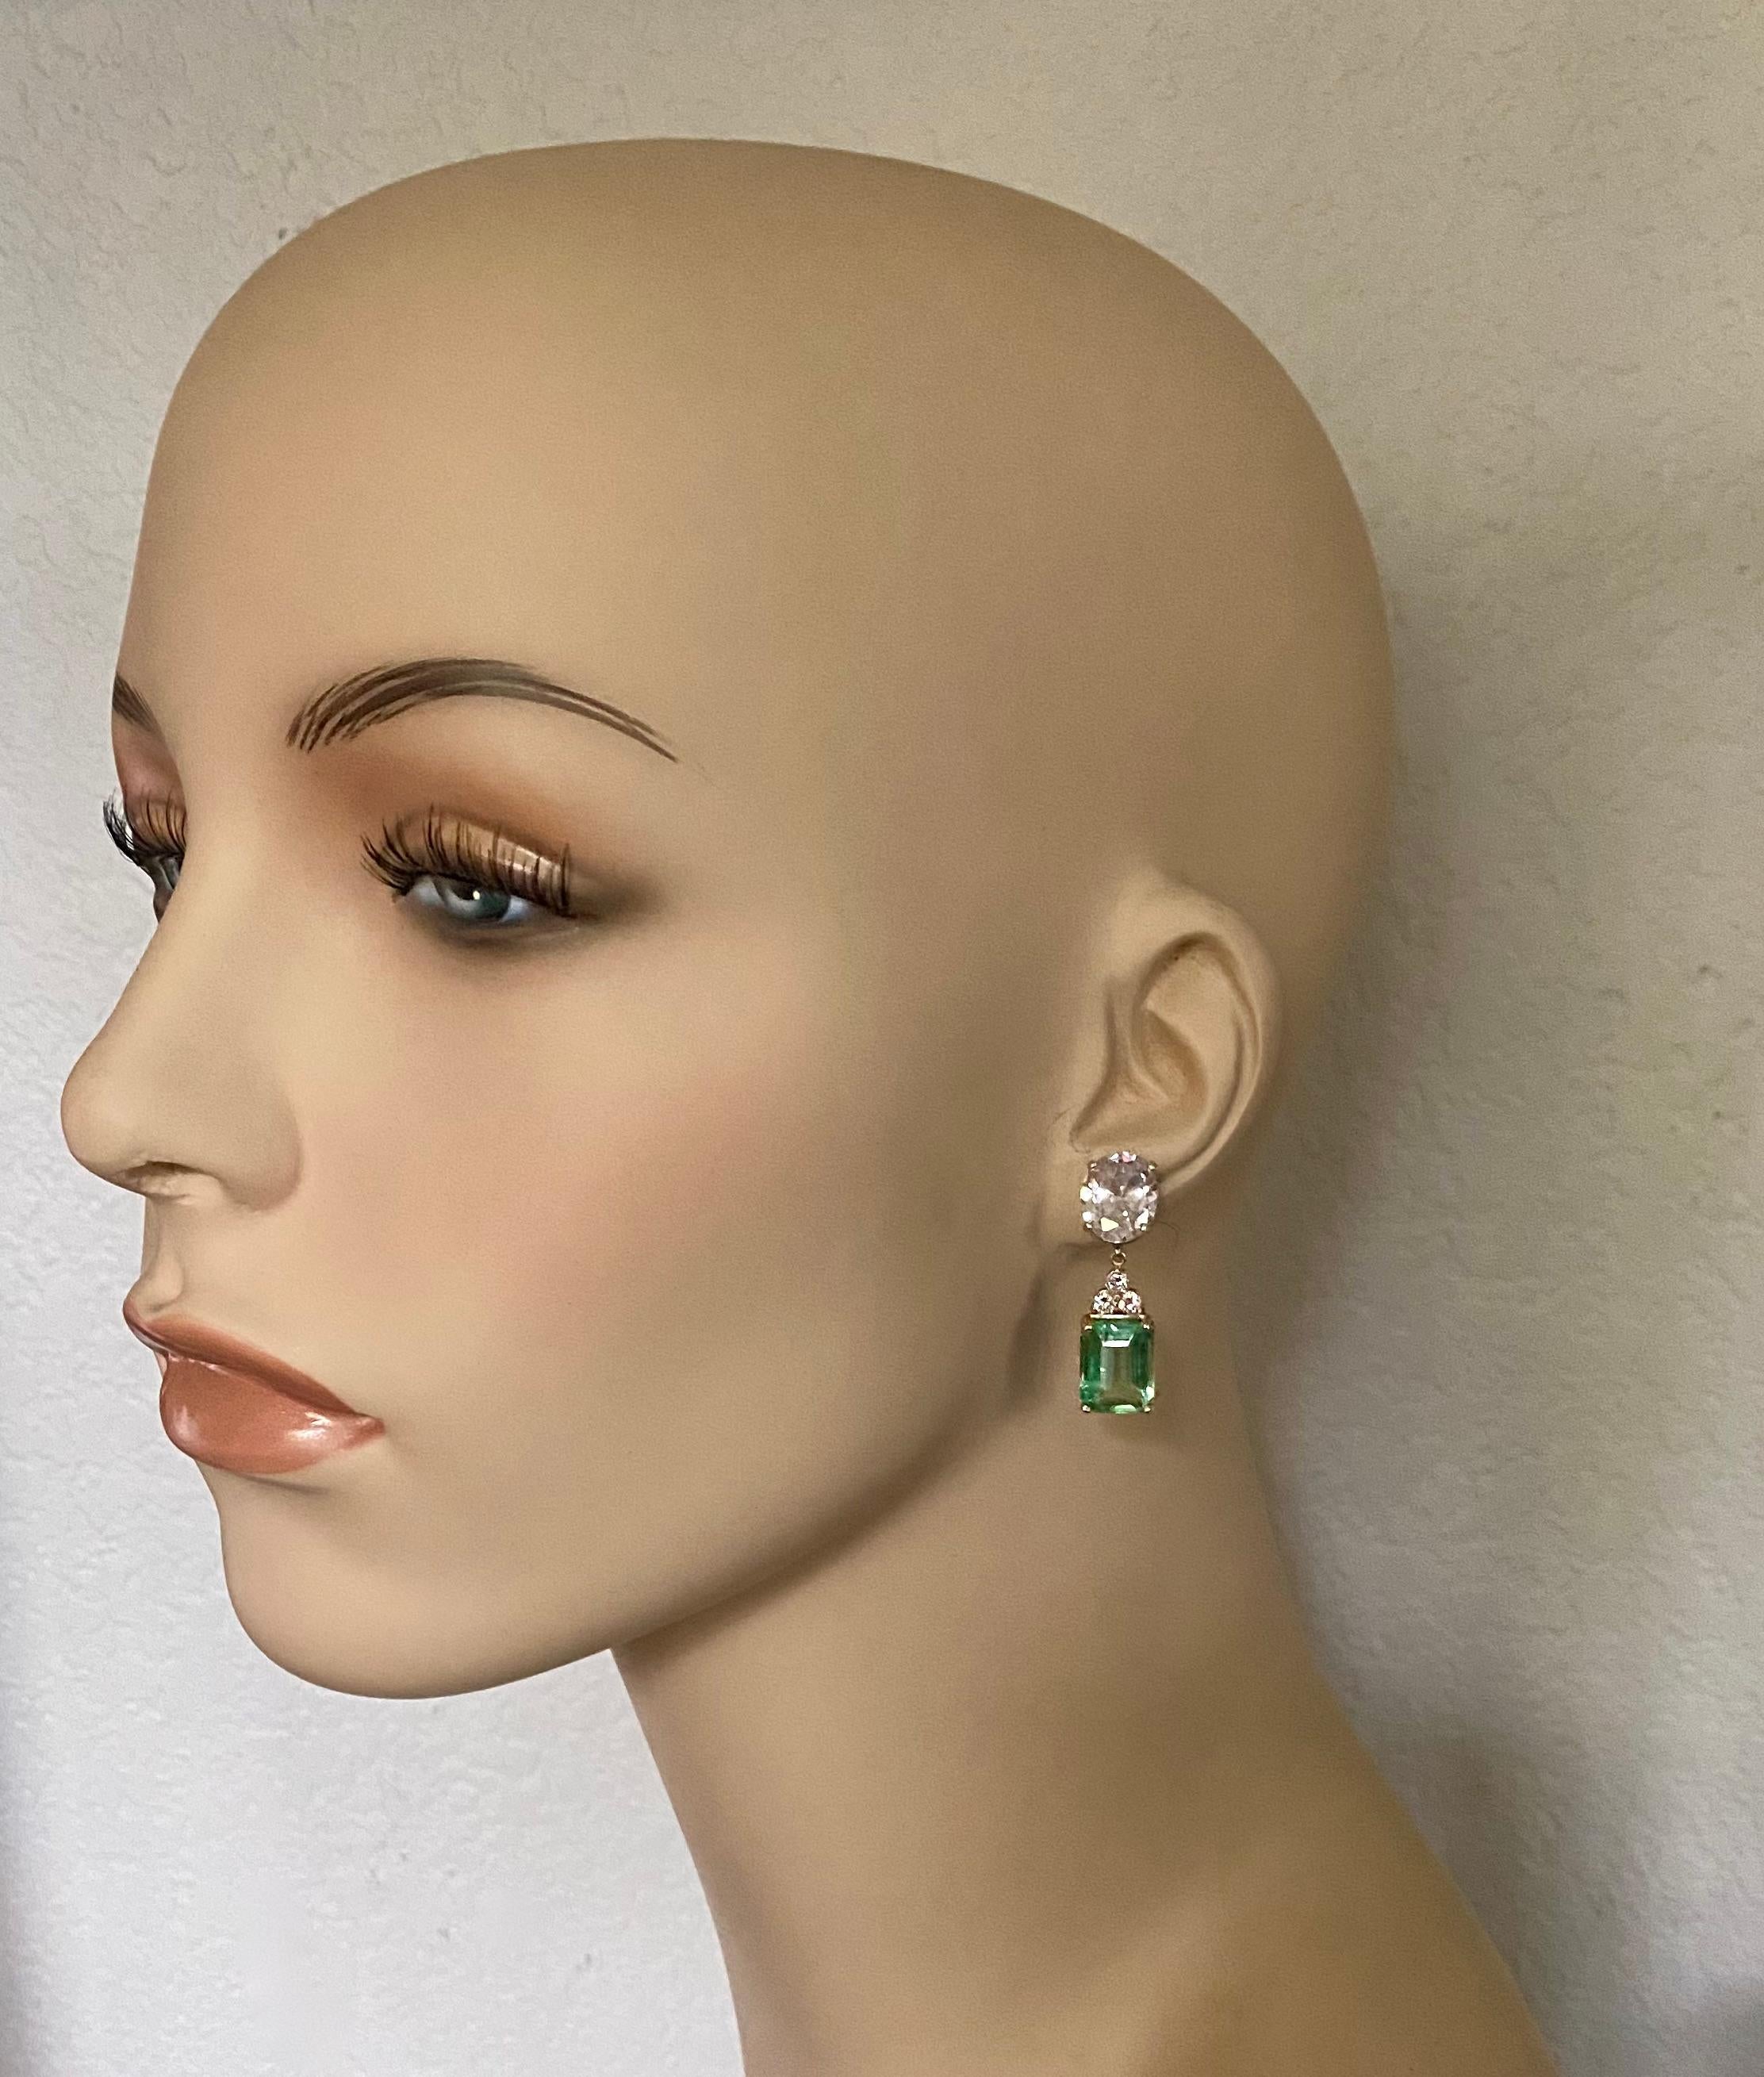 Green beryl is featured in these sophisticated dangle earrings.  Oval cut white sapphires (origin: Thailand) anchor the compositions.  The beryl (origin: Brazil) has been fashioned into emerald cut shapes and are a delicate mint green color.  White